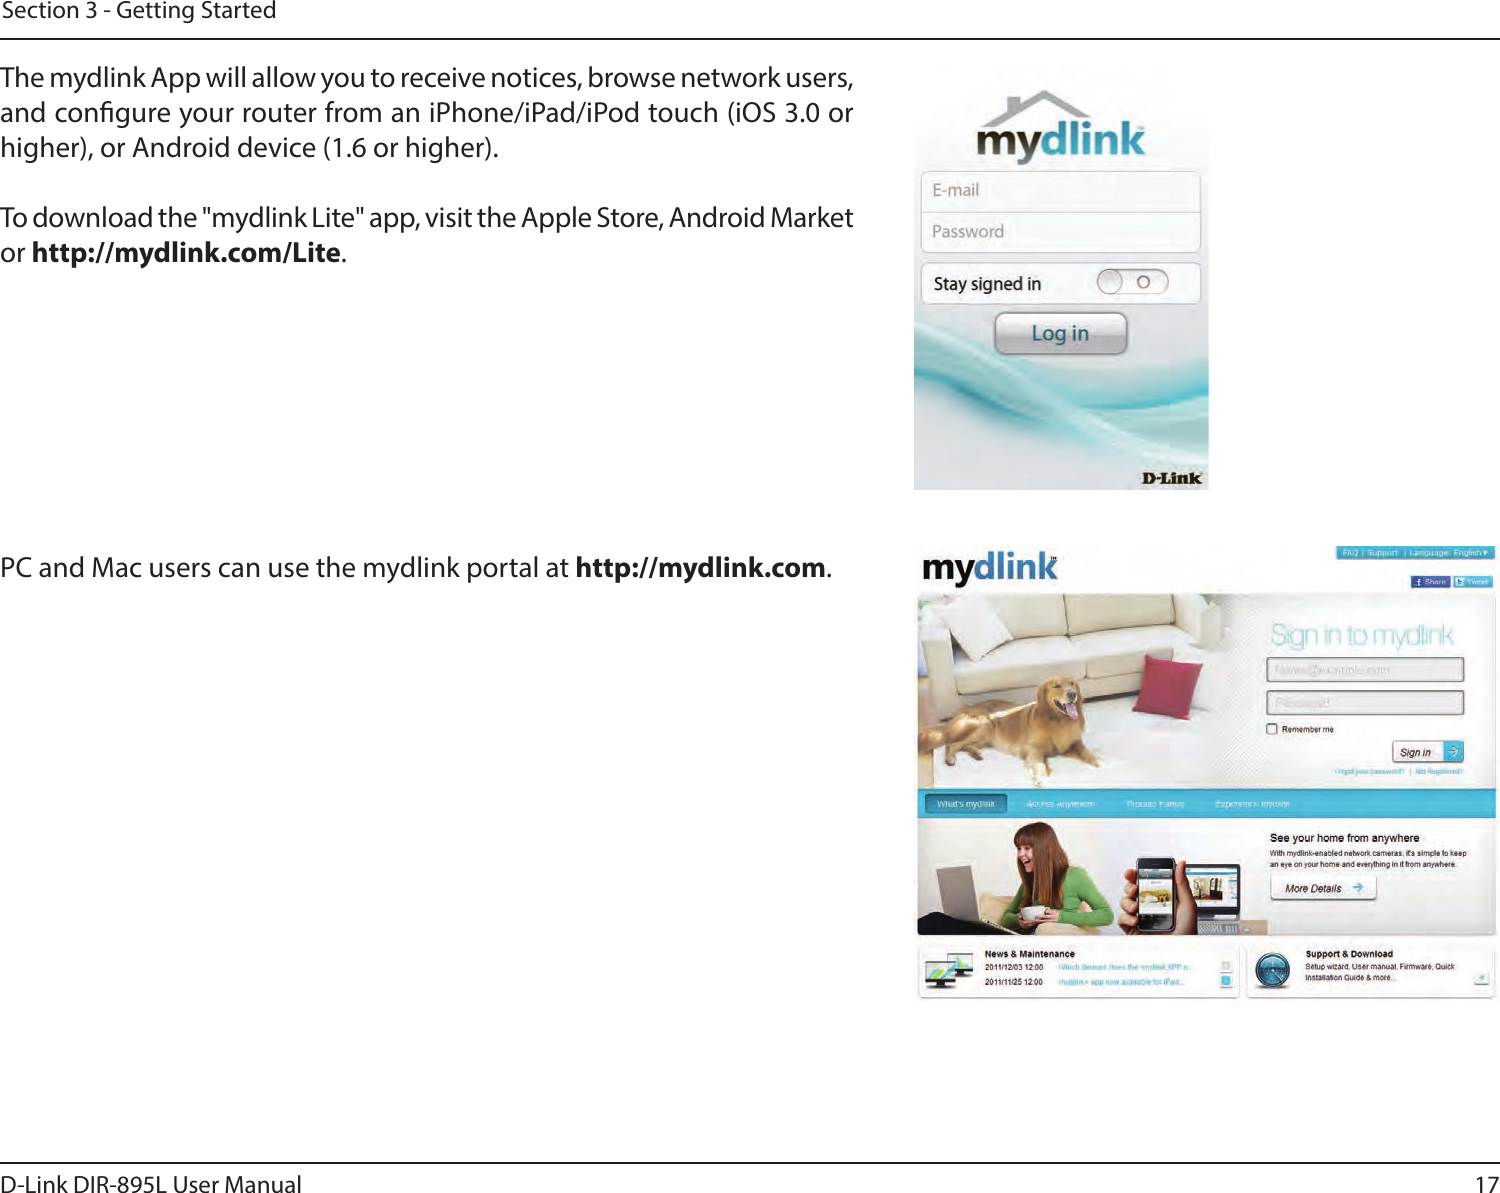 17D-Link DIR-895L User ManualSection 3 - Getting StartedThe mydlink App will allow you to receive notices, browse network users, and congure your router from an iPhone/iPad/iPod touch (iOS 3.0 or higher), or Android device (1.6 or higher).To download the &quot;mydlink Lite&quot; app, visit the Apple Store, Android Market or http://mydlink.com/Lite. PC and Mac users can use the mydlink portal at http://mydlink.com.